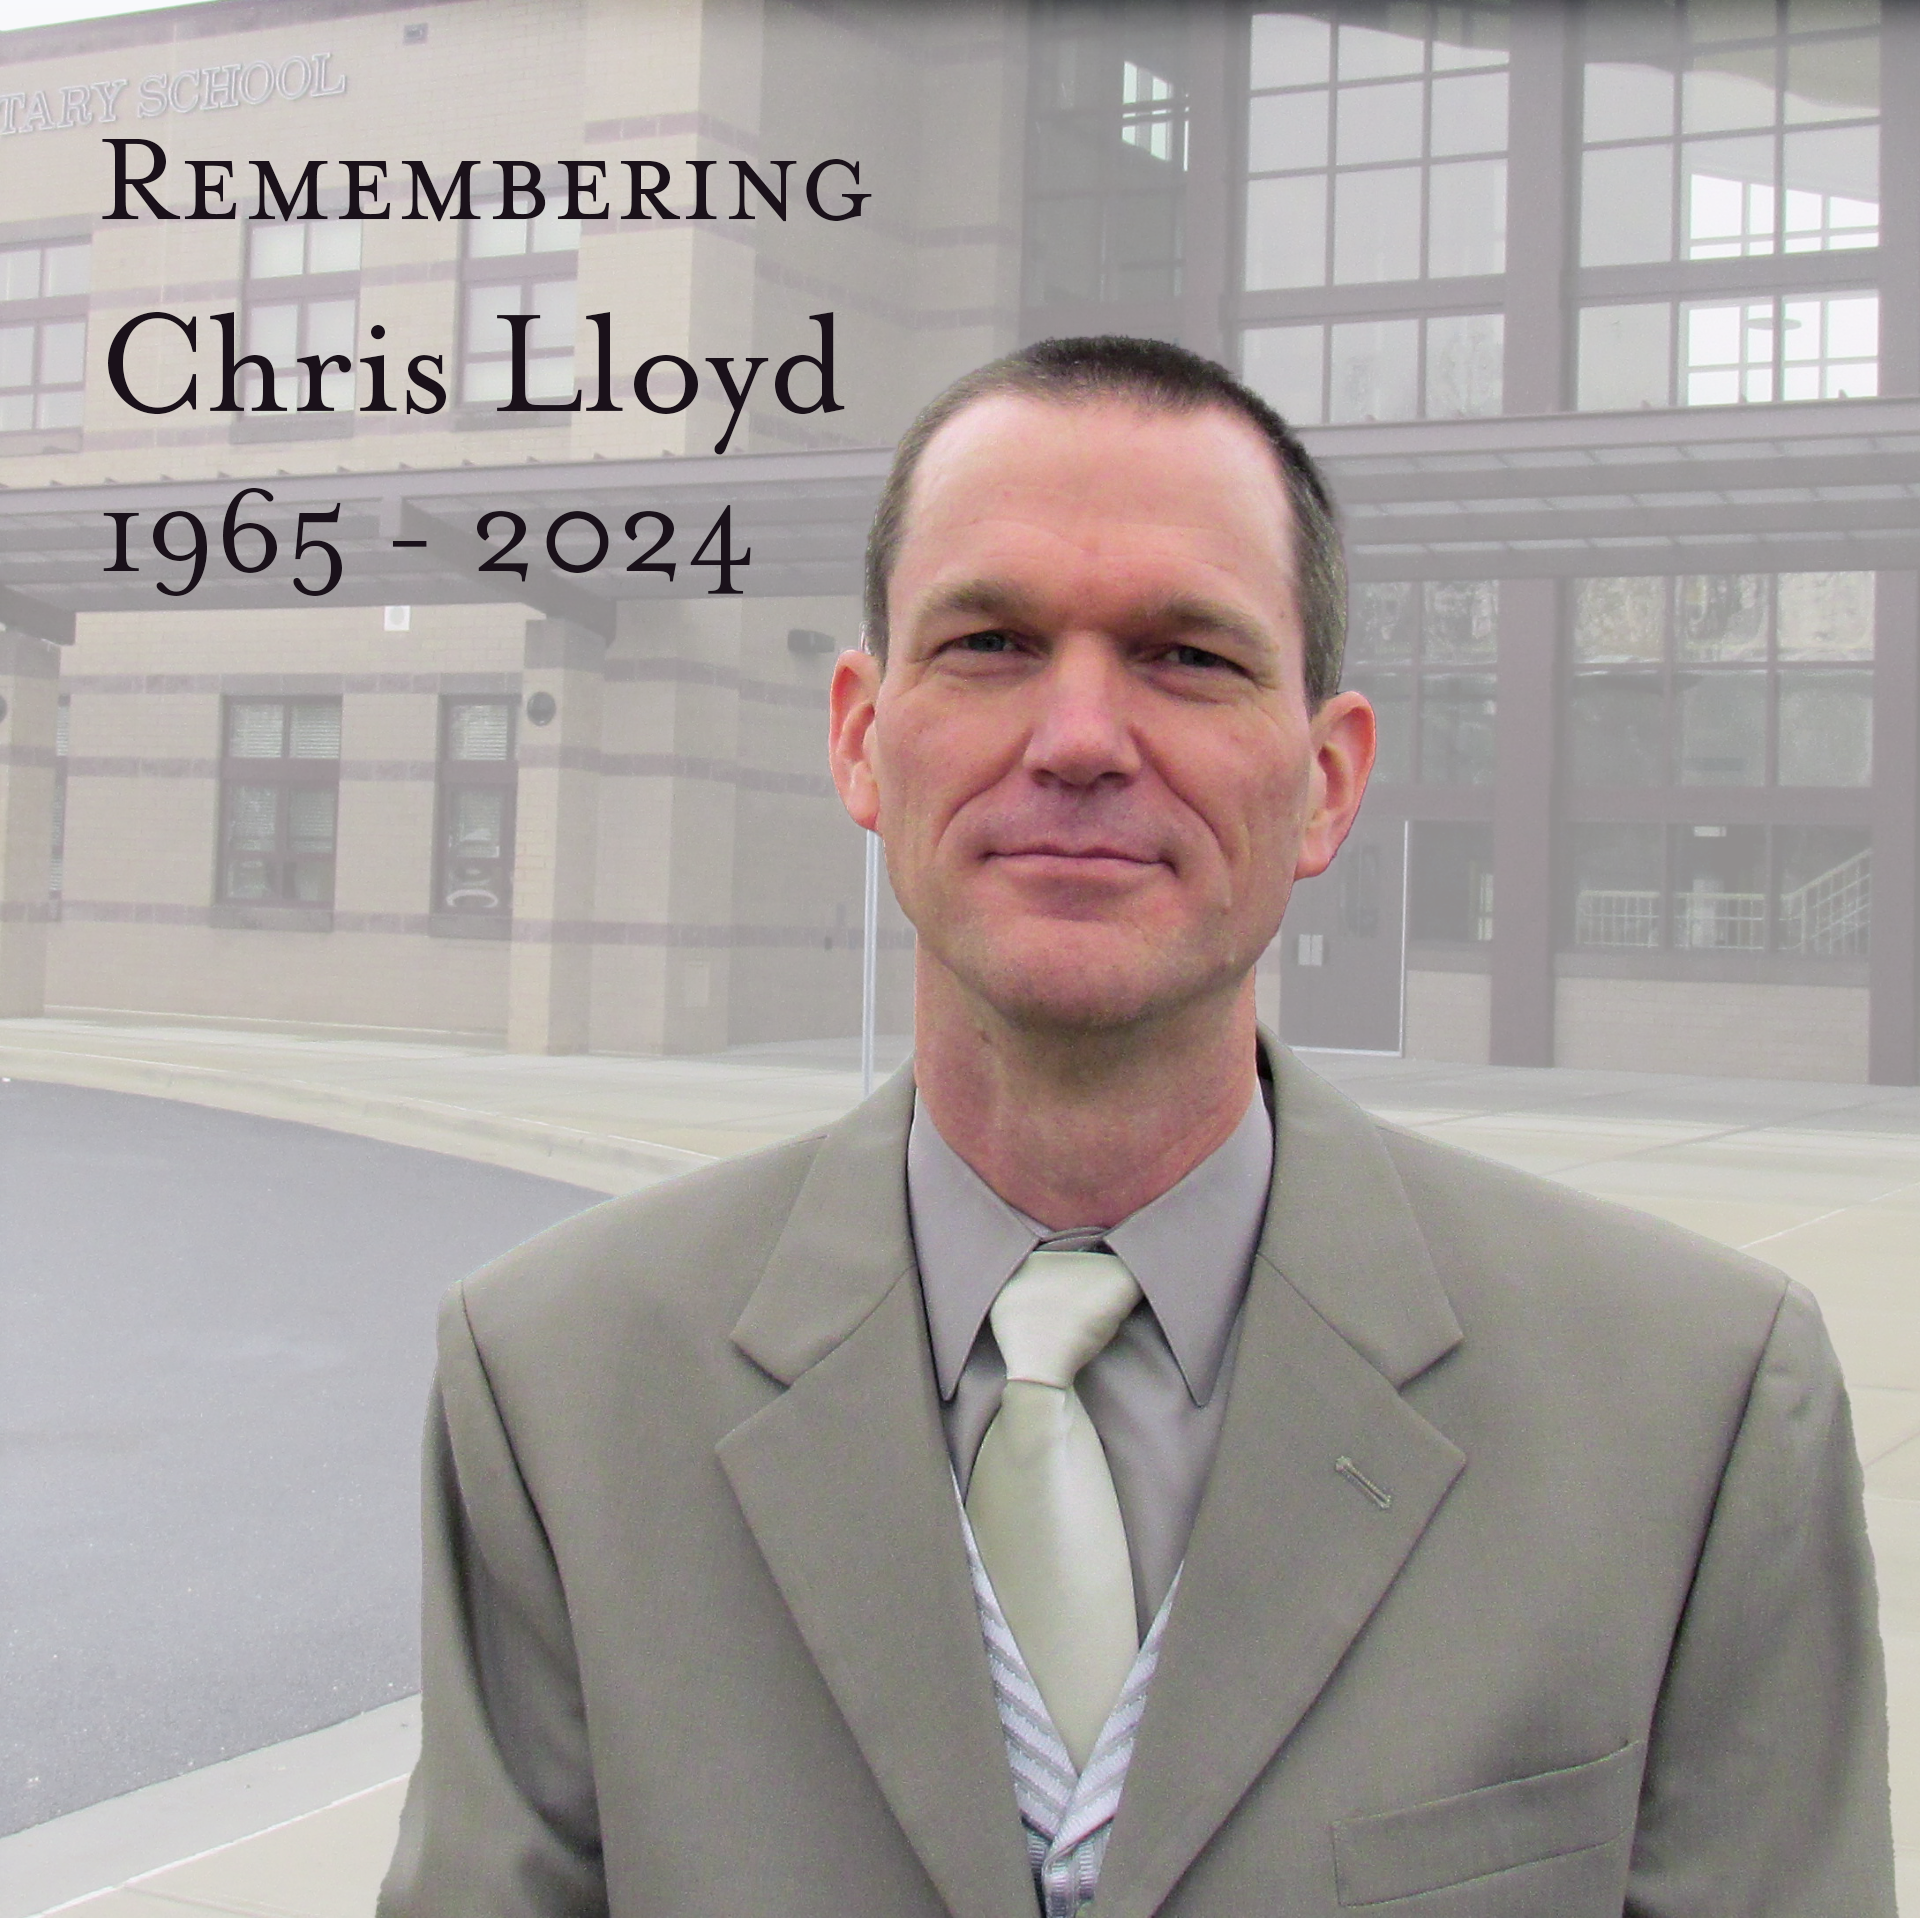 Chris was a visionary and inspiring union leader. He cared deeply about his colleagues 'wellbeing, our students' success, and the future of public education.